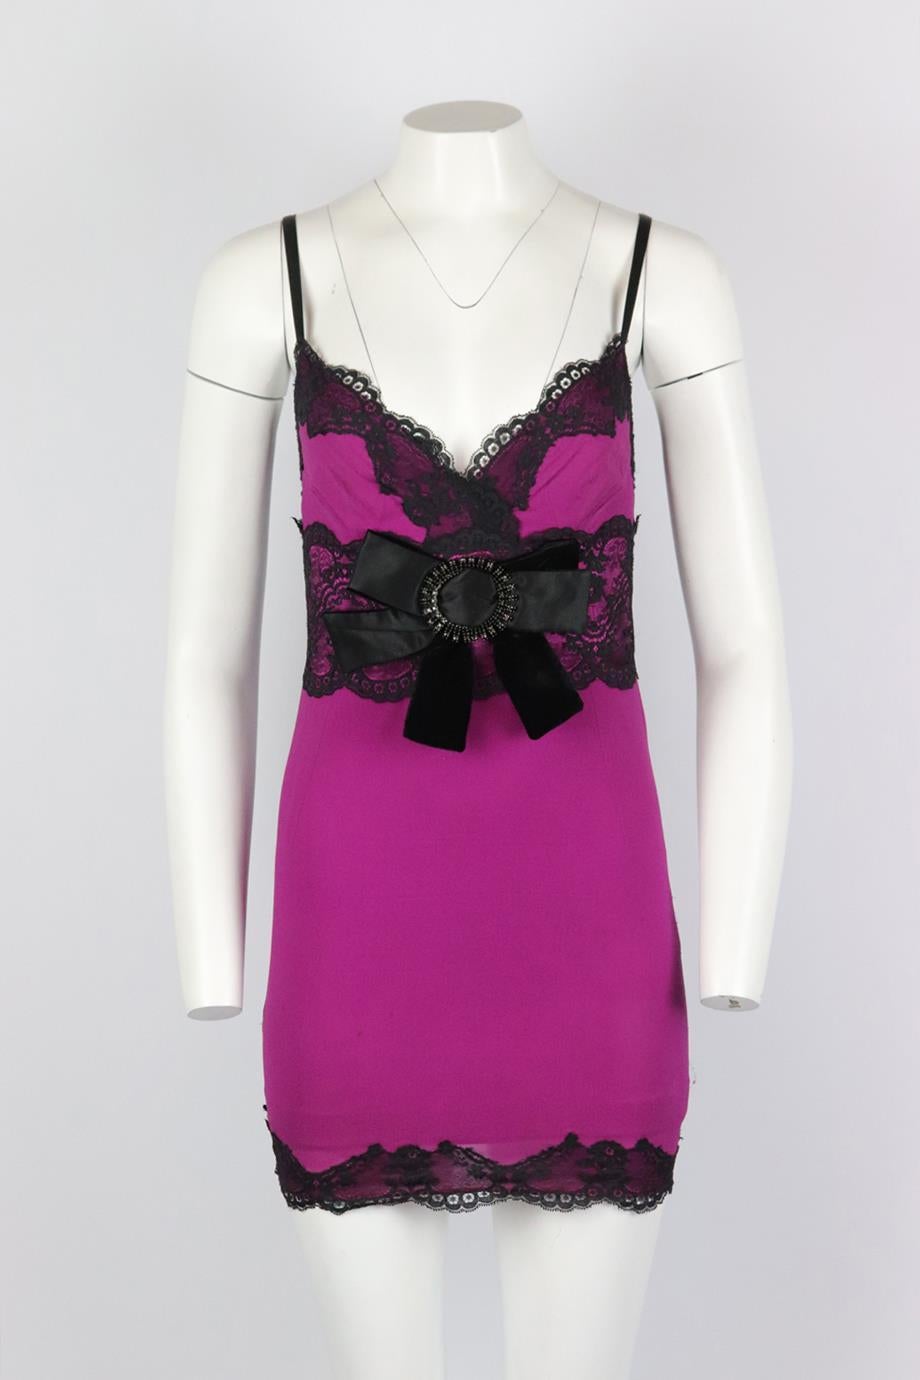 Dolce & Gabbana lace trimmed silk blend mini dress. Purple and black. Sleeveless, v-neck. Zip fastening at back. Size: IT 44 (UK 12, US 8, FR 40). Bust: 30 in. Waist: 28 in. Hips: 34 in. Length: 33 in. Fair condition - Some marks to exterior fabric.